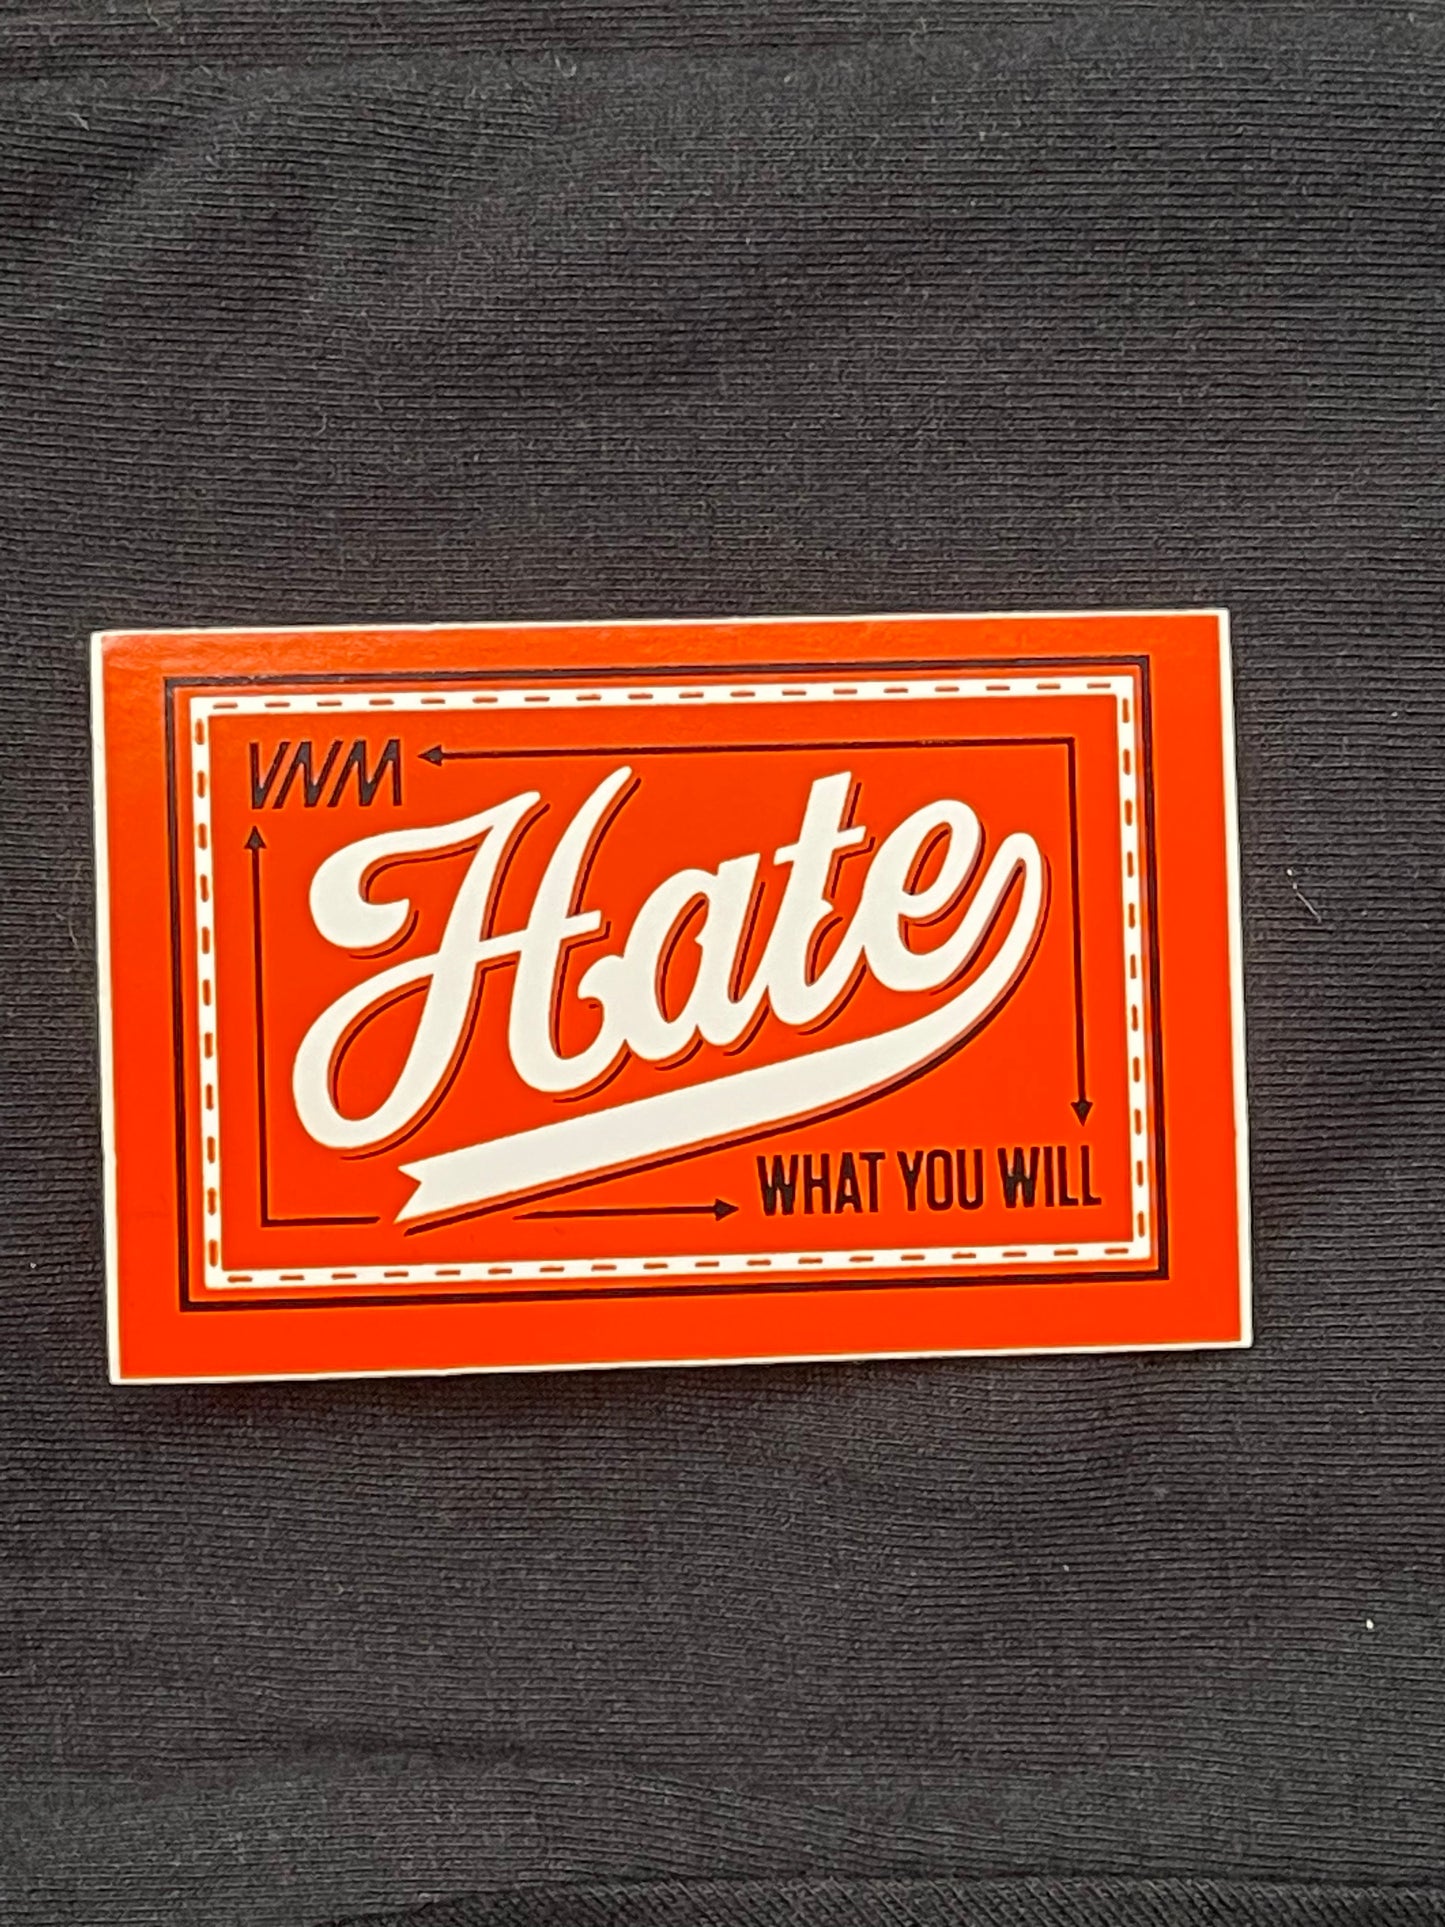 HATE WHAT YOU WILL - STICKER PACK